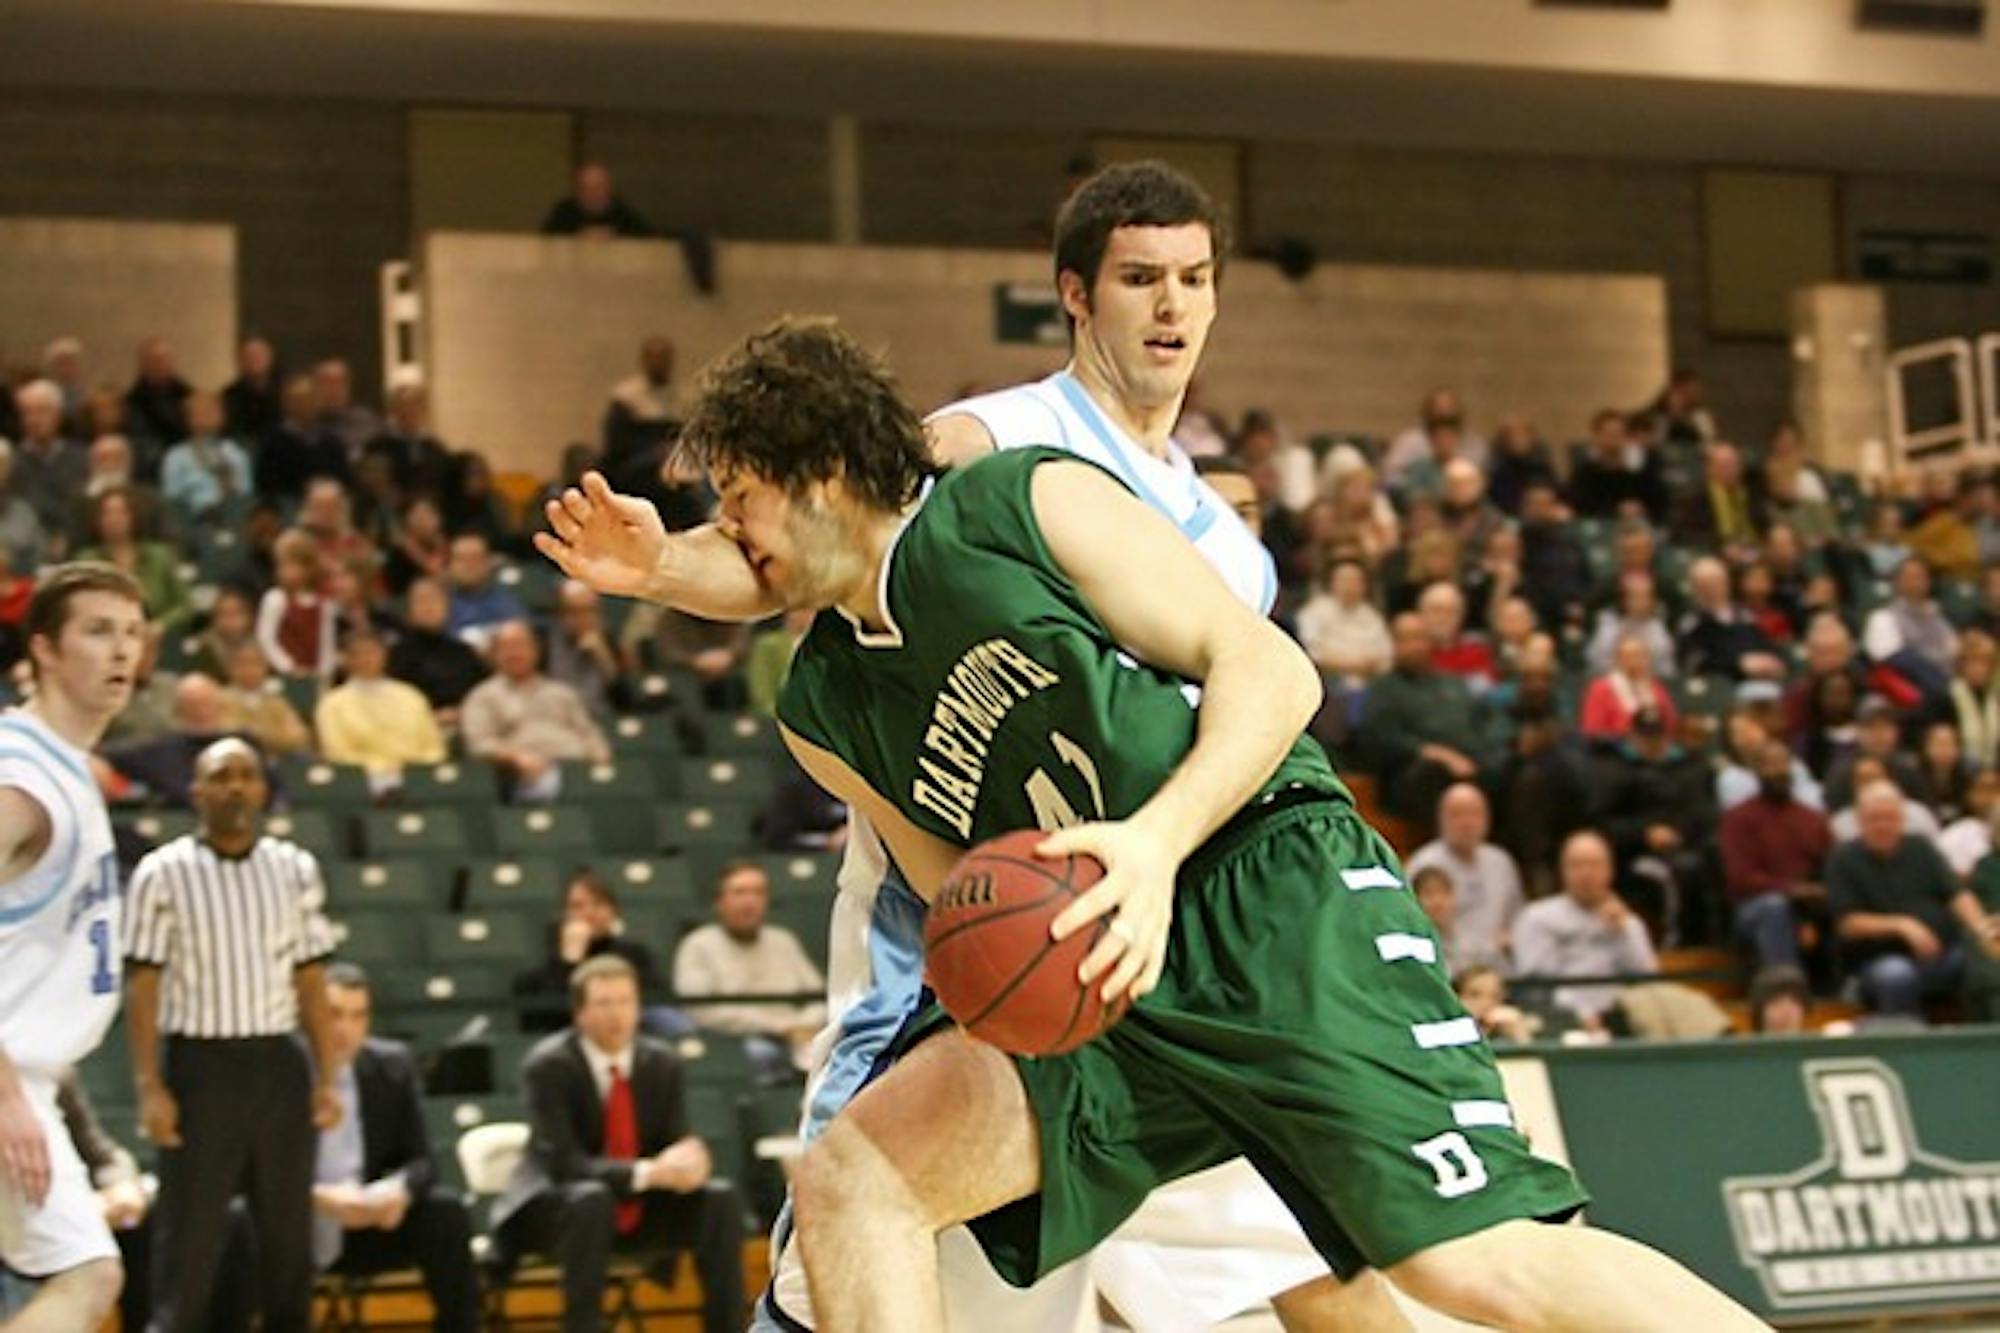 The Big Green men's basketball team's two losses over the weekend ended any NCAA Tournament hopes.